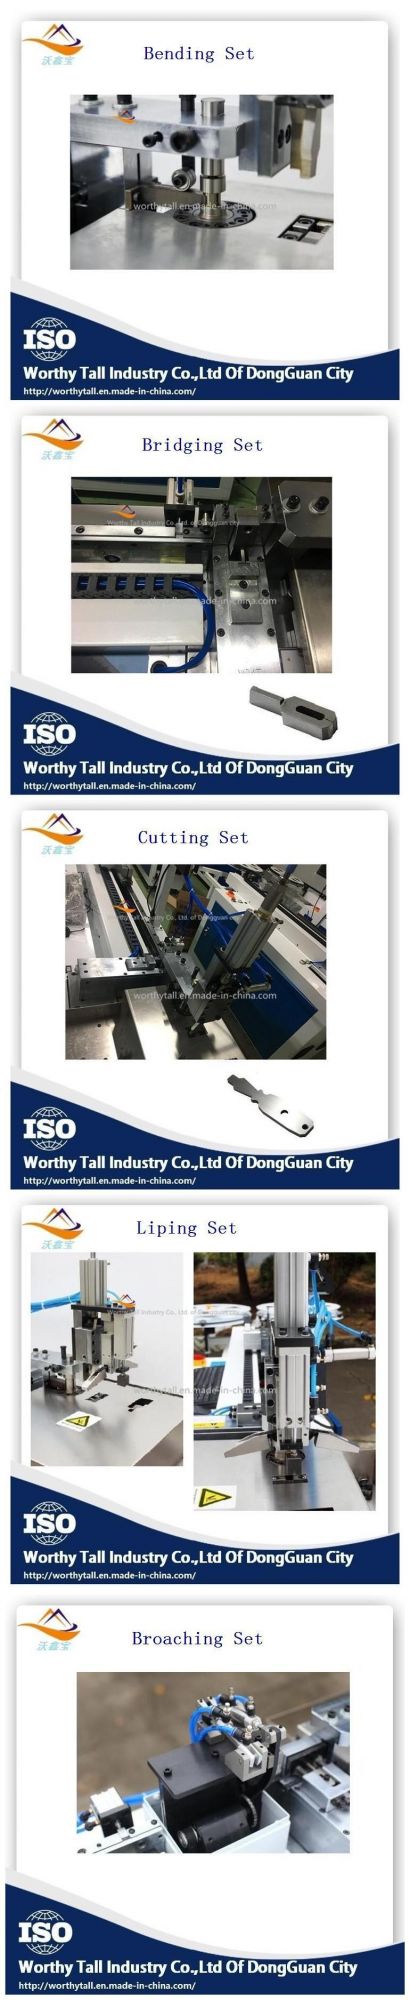 High Efficient Bending Machine for Shoe Making Industry